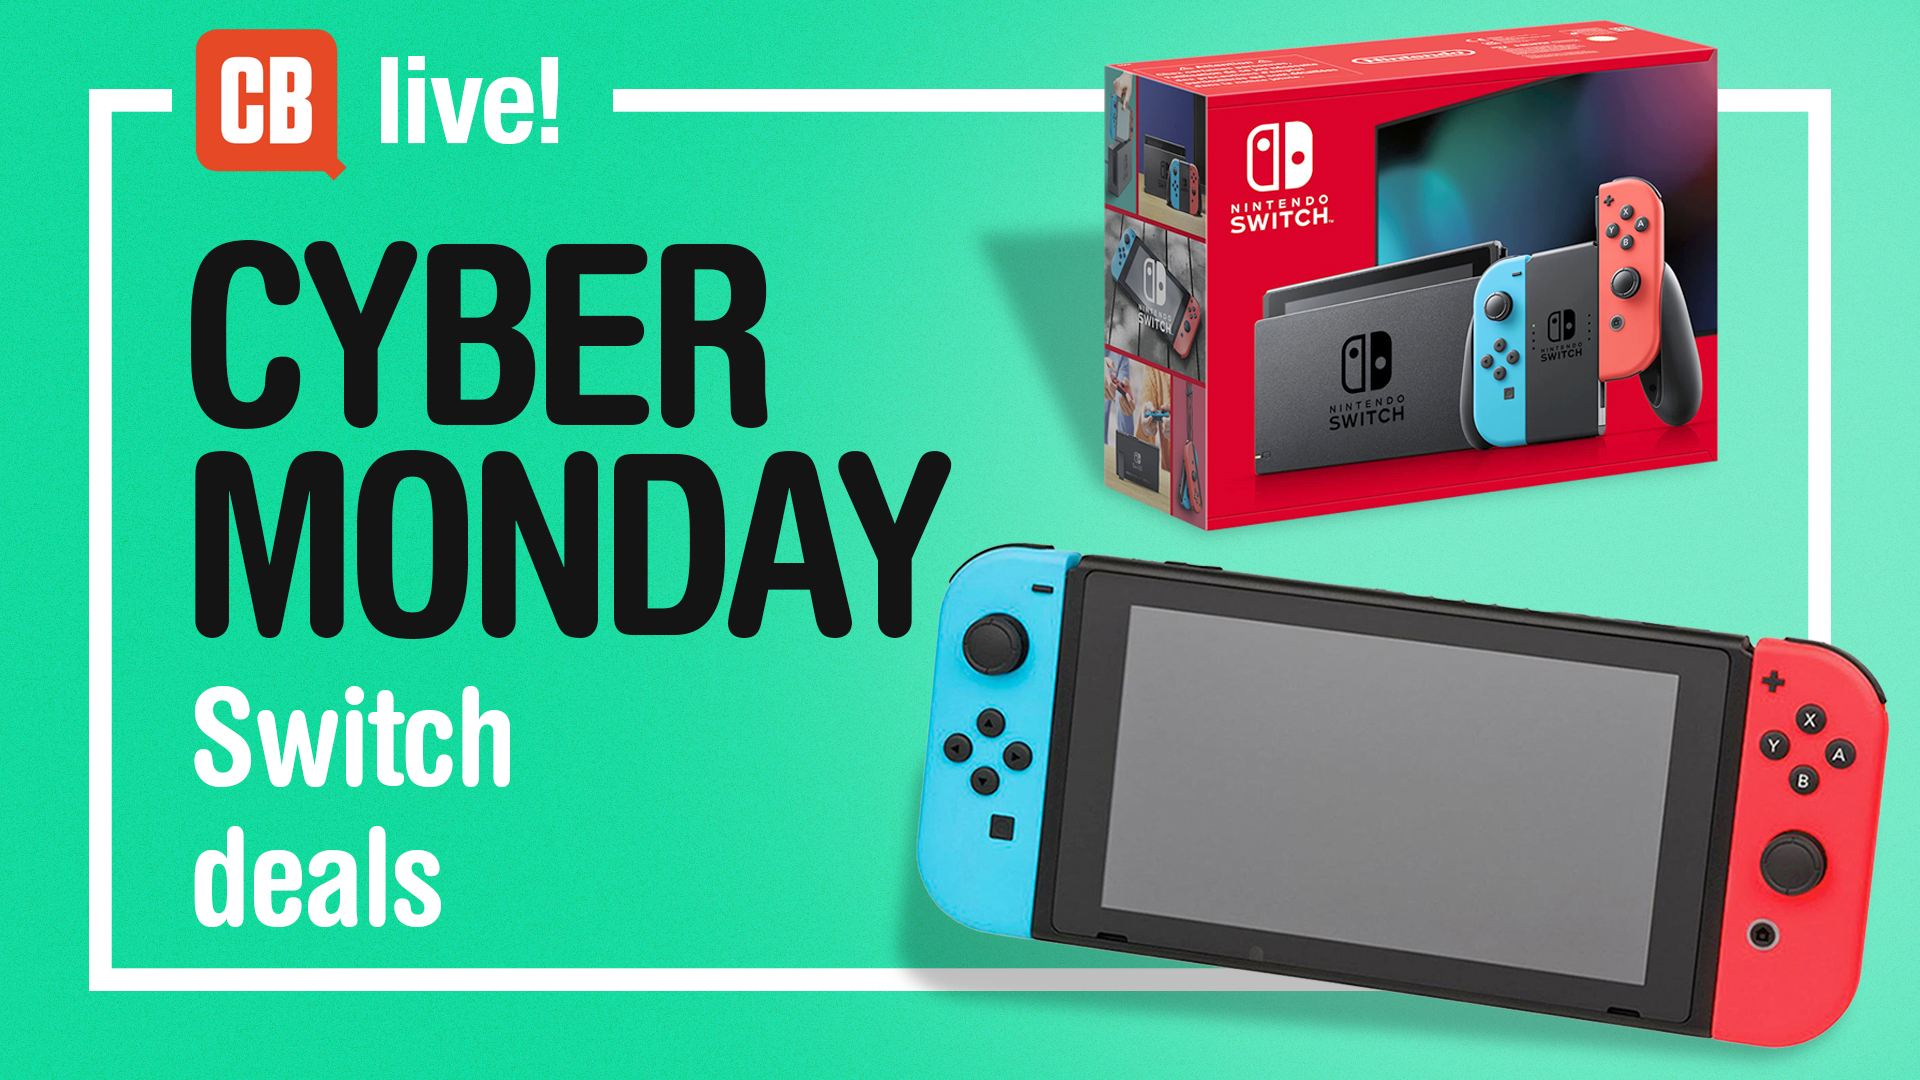 Nintendo Switch Black Friday sale - Thousands of bargains